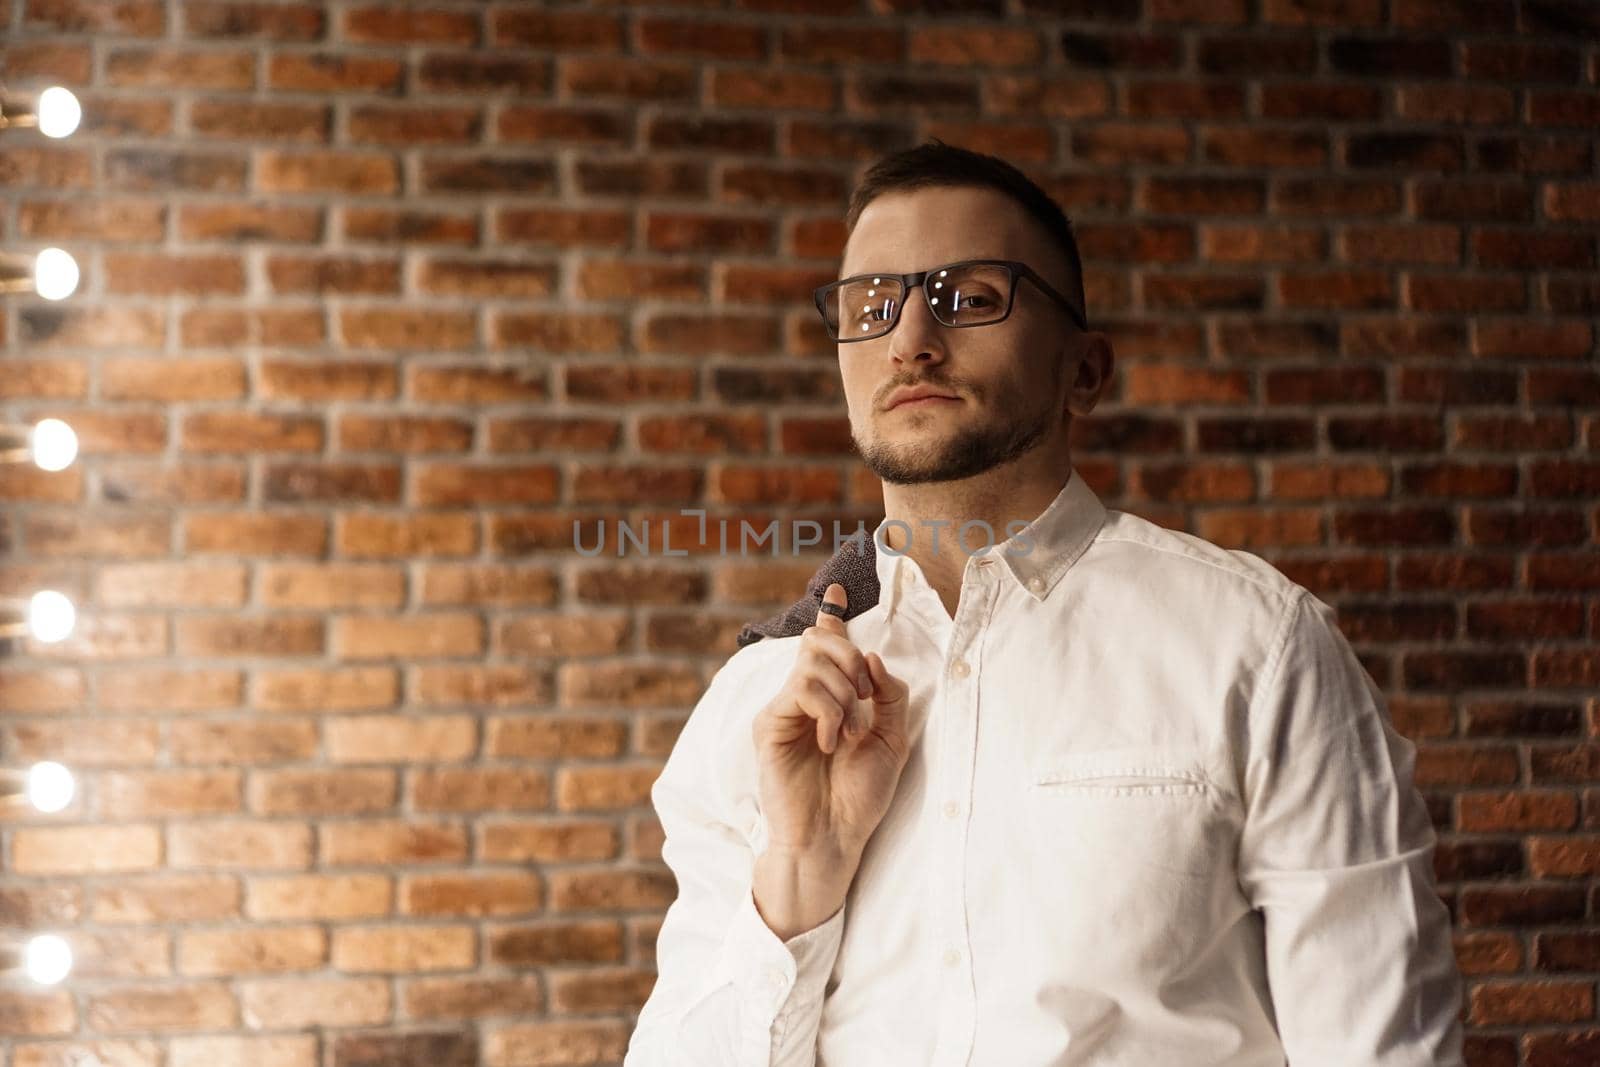 Handsome man with glasses standing near red brick wall by natali_brill